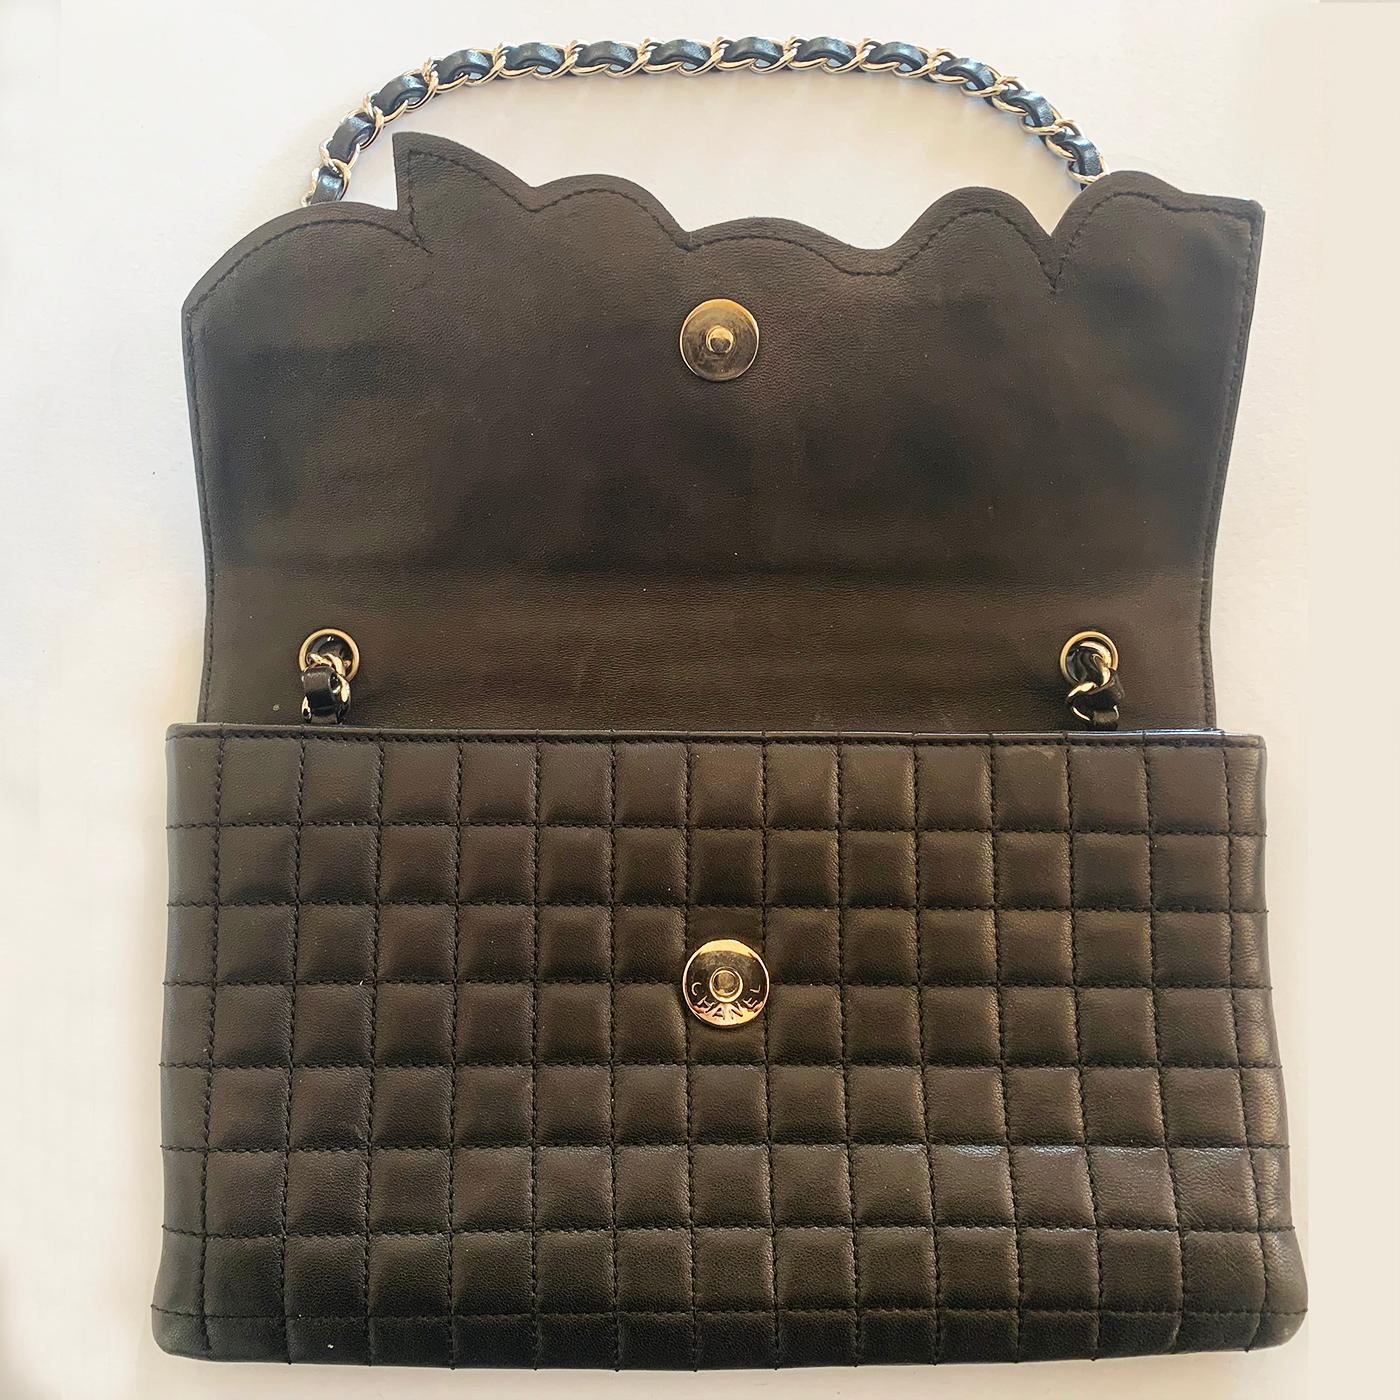 Authentic Black Chanel Camelia handbag bag purse In Good Condition For Sale In Daylesford, Victoria